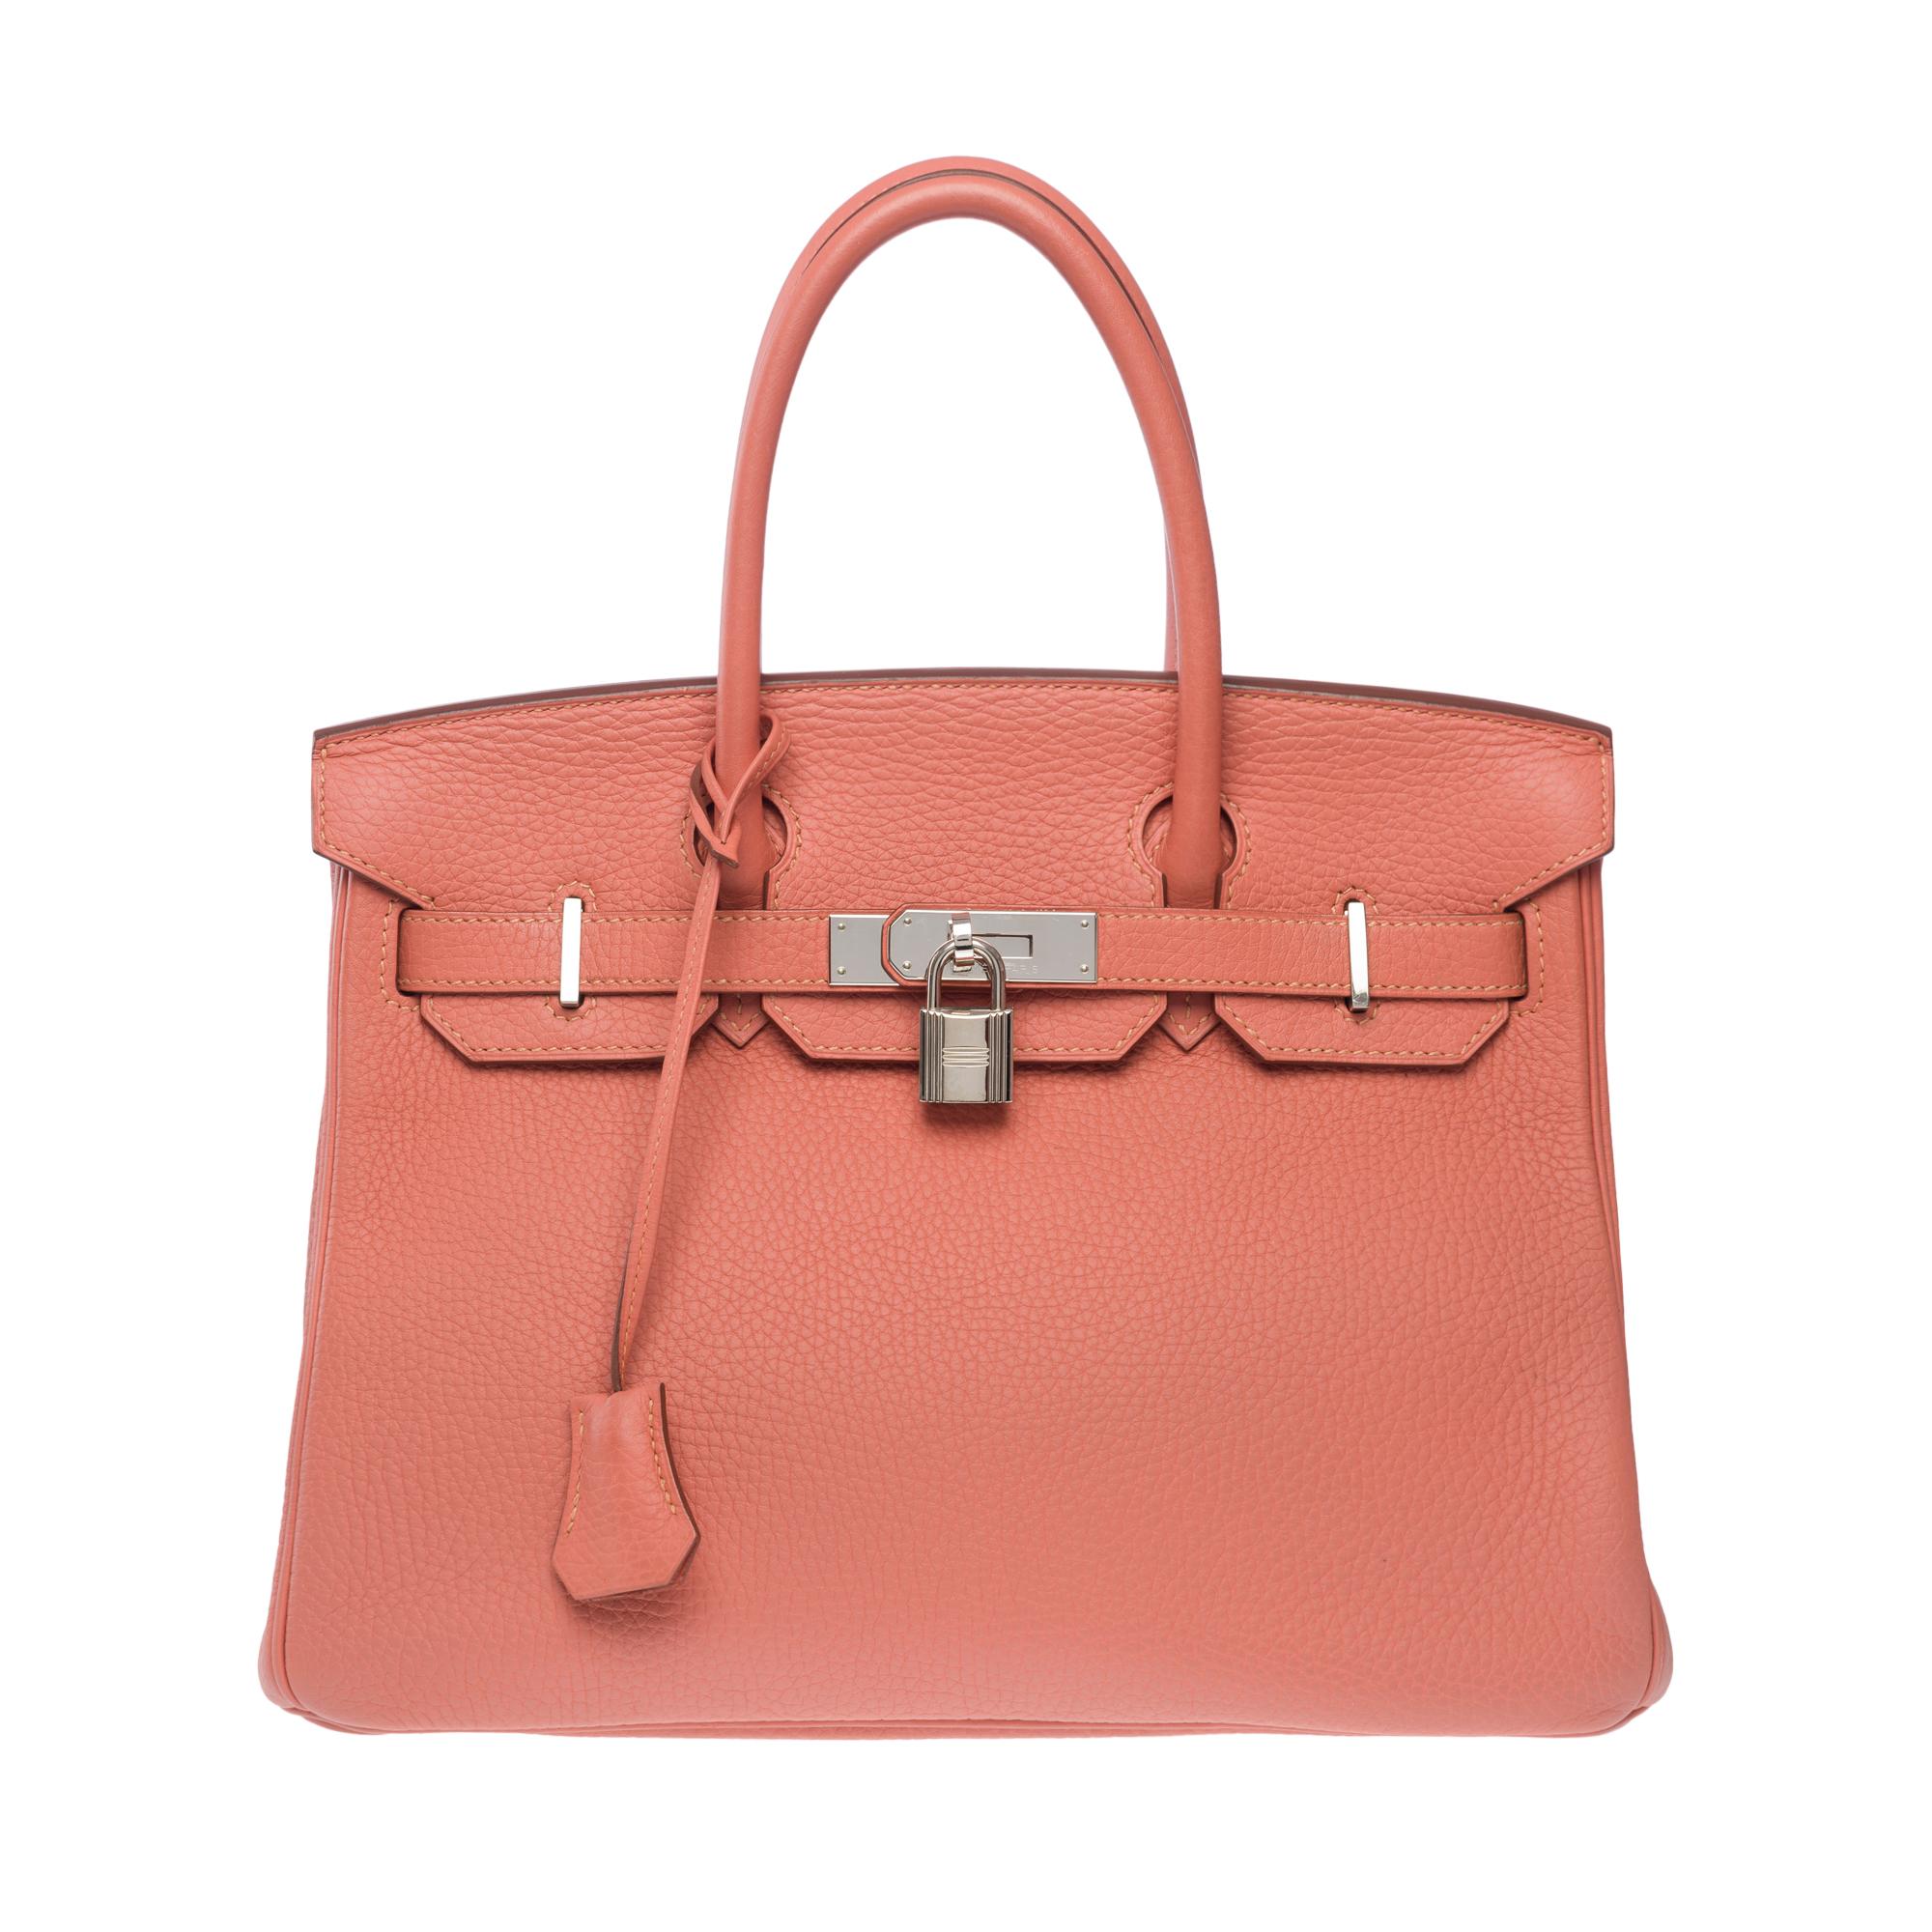 Amazing​ ​and​ ​Bright​ ​Hermes​ ​Birkin​ ​30​ ​handbag​ ​in​ ​Rose​ ​Tea​ ​Togo​ ​leather​ ​,​ ​palladium​ ​silver​ ​metal​ ​trim​ ​,​ ​double​ ​handle​ ​in​ ​pink​ ​leather​ ​for​ ​hand​ ​carry

Flap​ ​closure
Pink​ ​leather​ ​inner​ ​lining​ ​,​